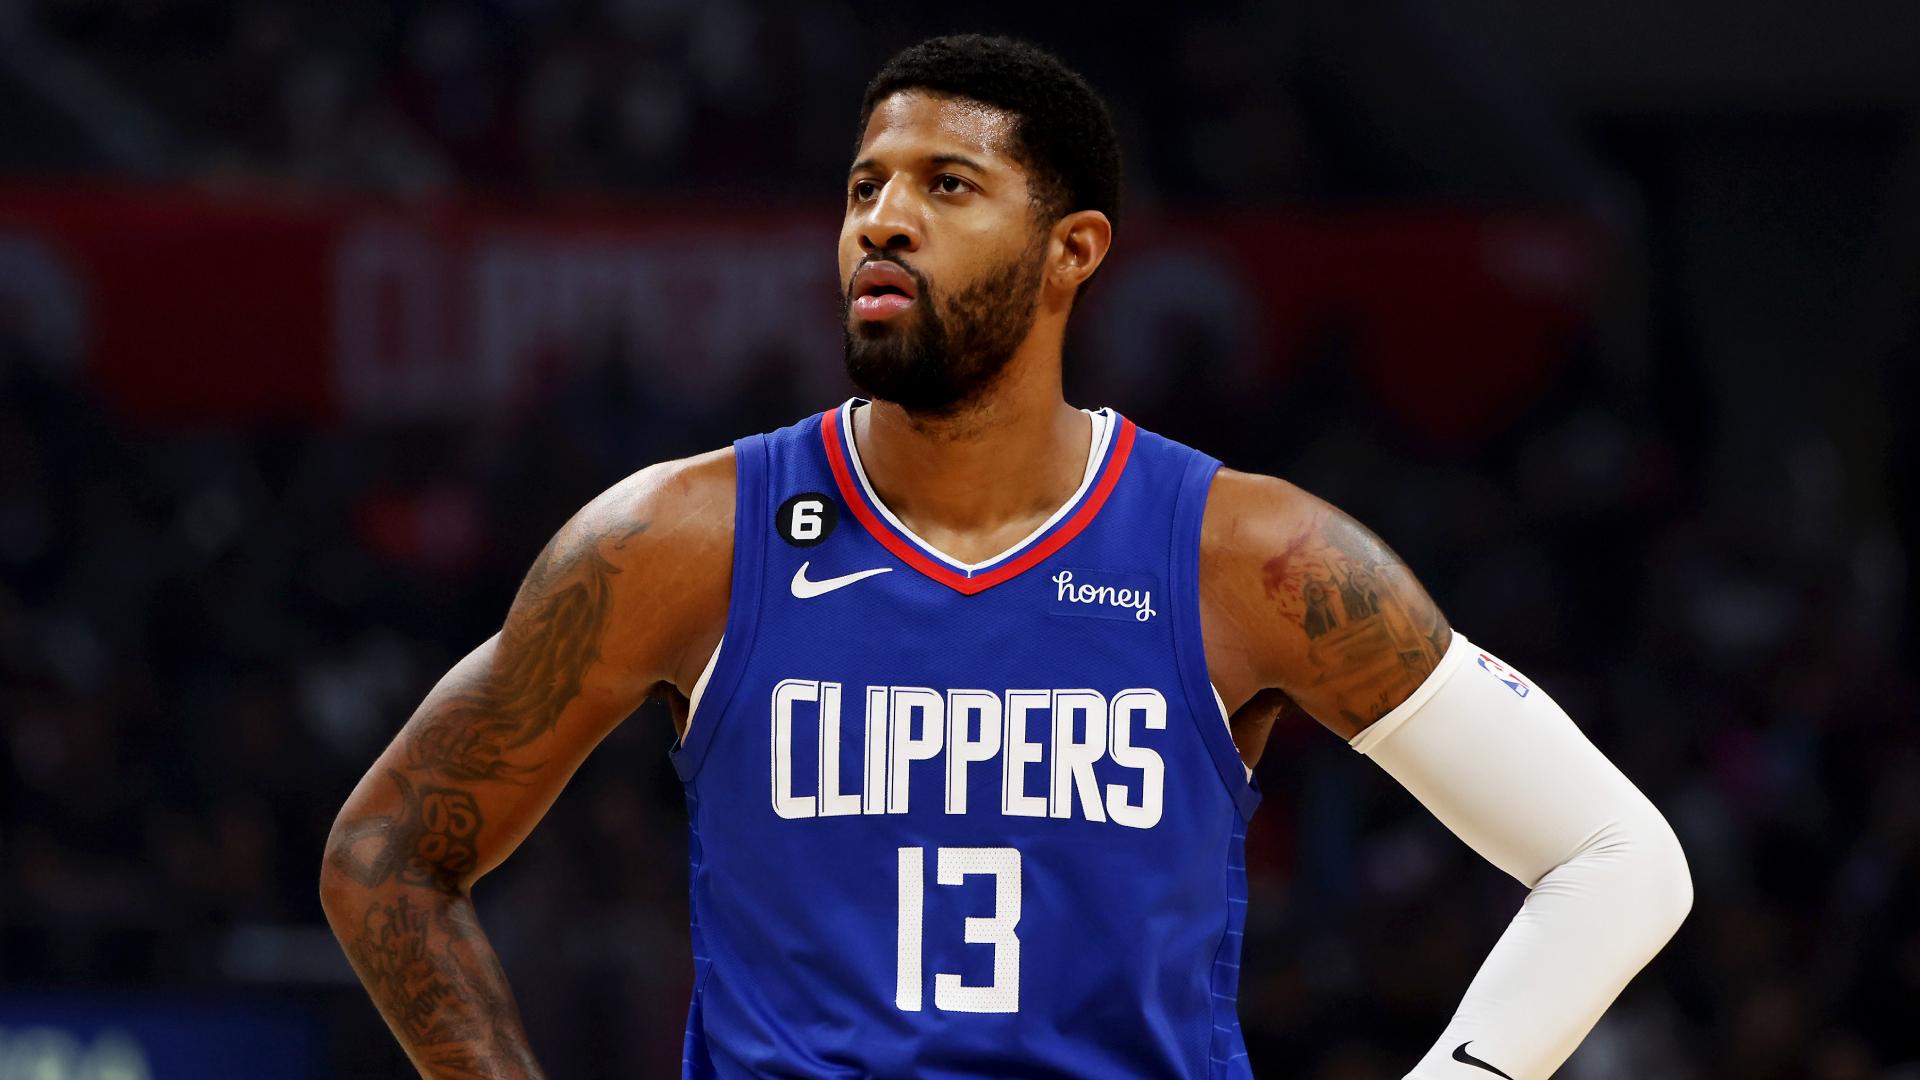 NBA Trade Proposal: Paul George to Save the New York Knicks? Will they take the Risk on him?